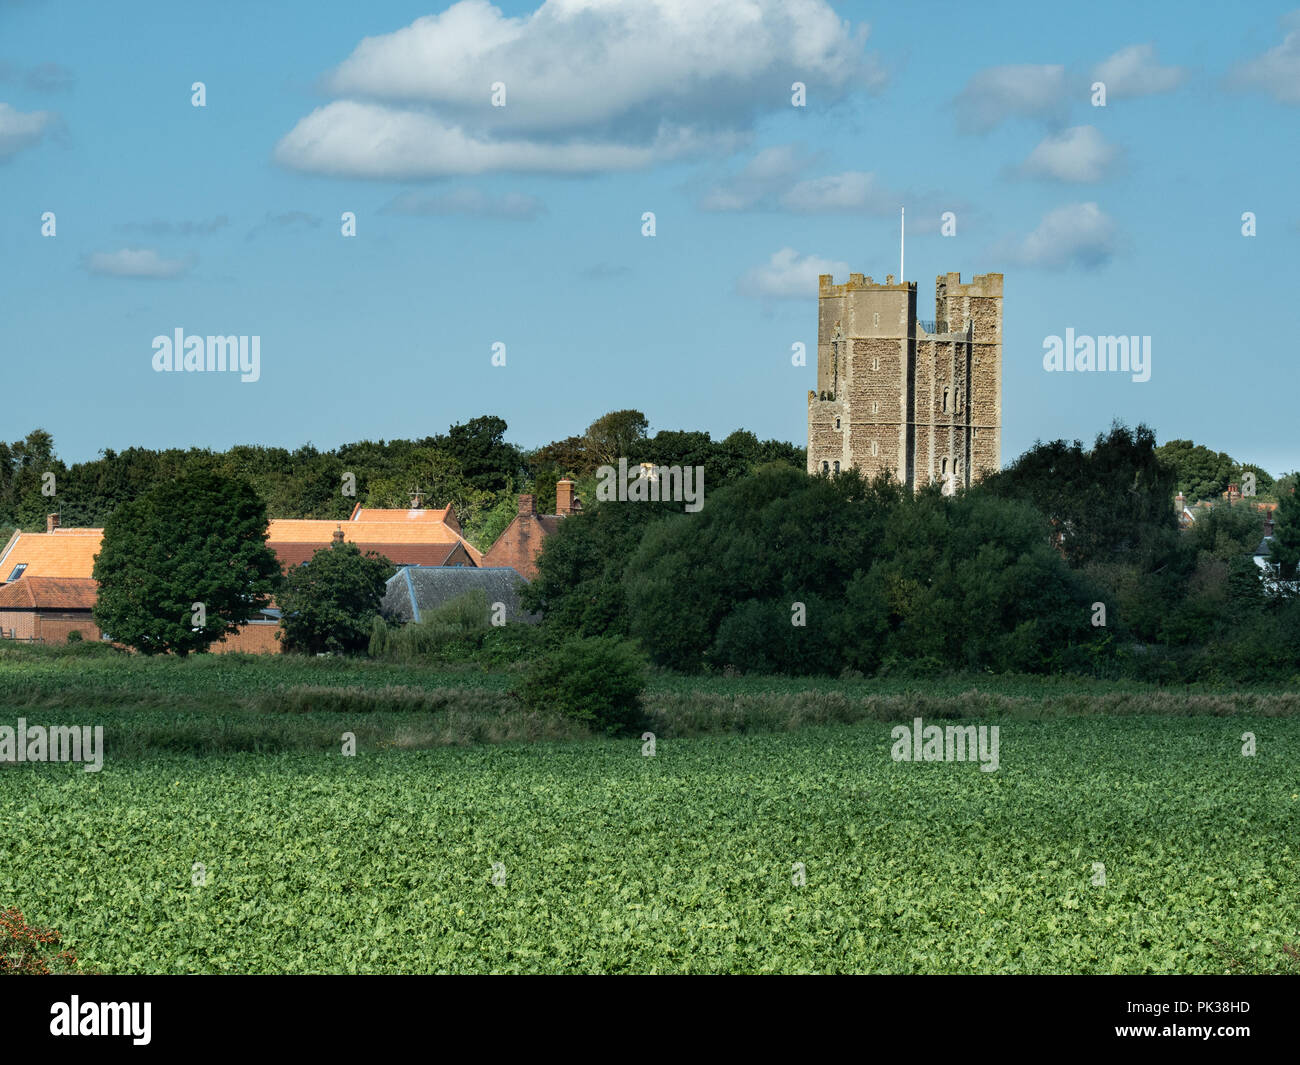 Orford castle viewed from the banks of the river Alde of farmland Stock Photo